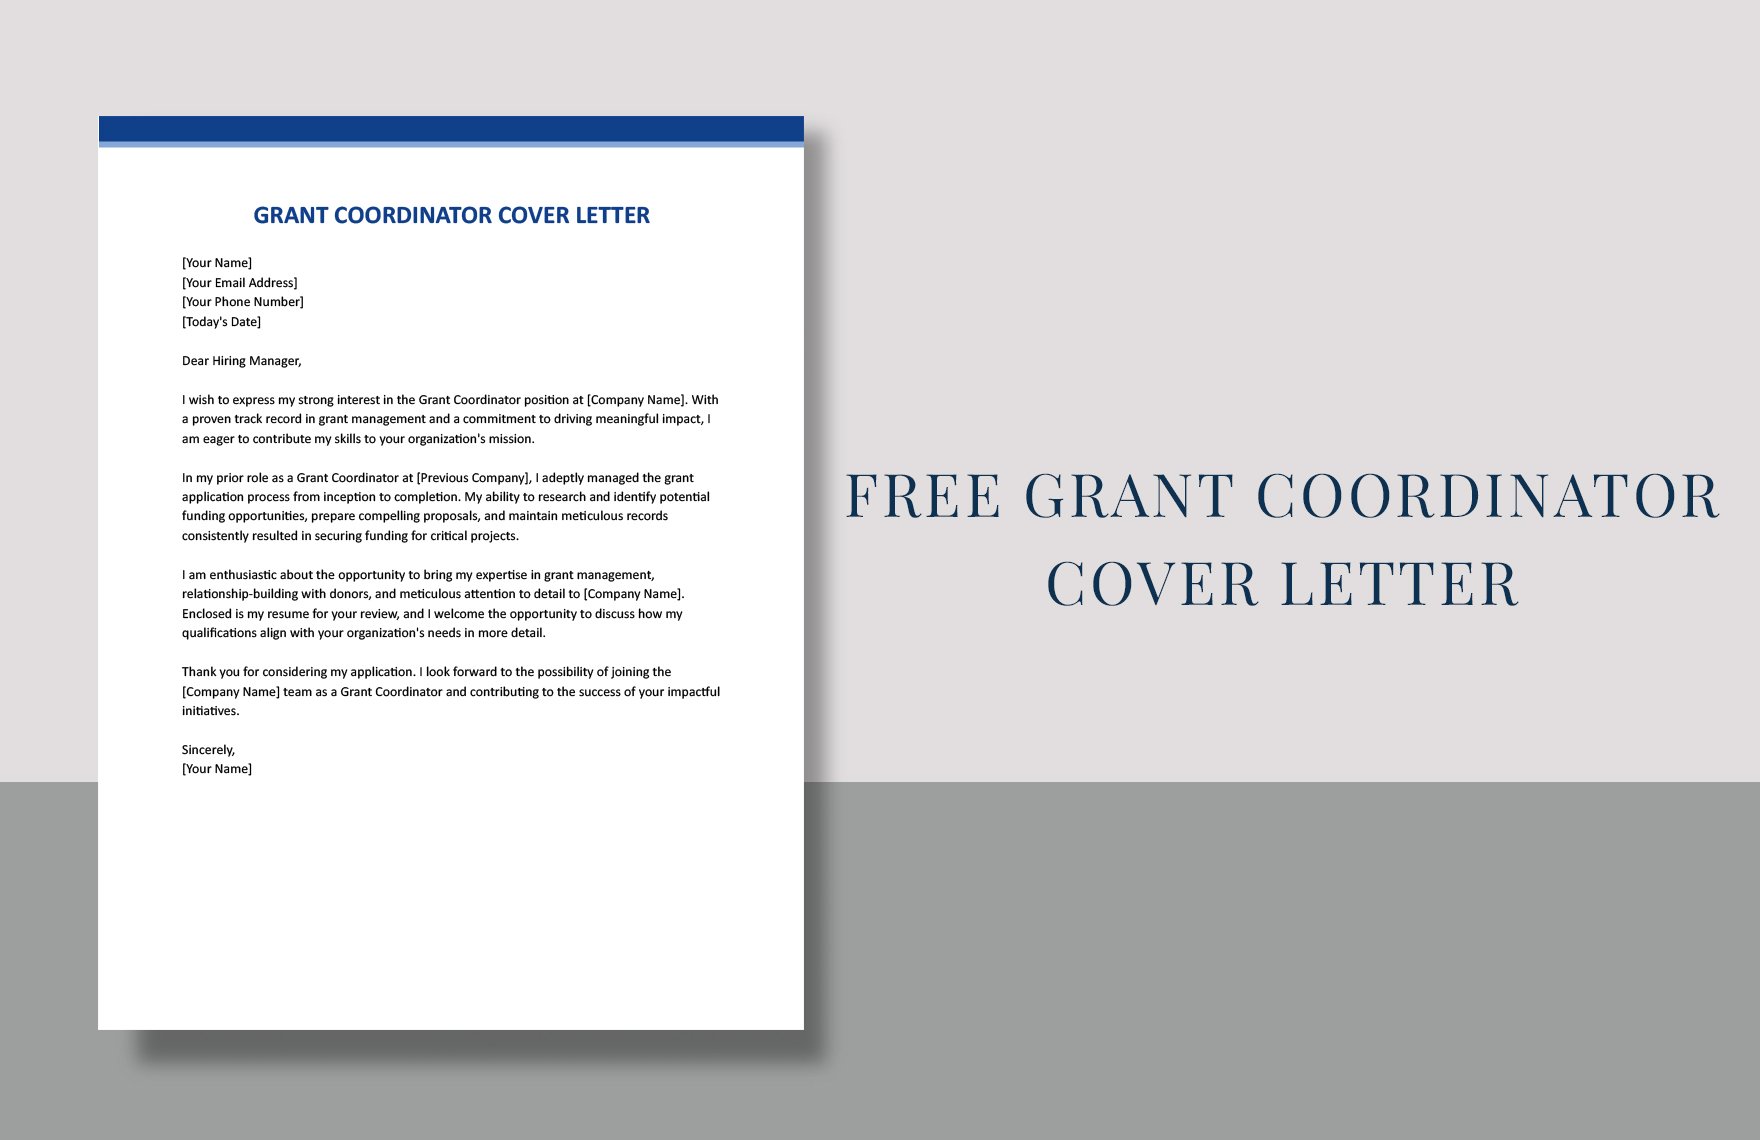 Grant Coordinator Cover Letter in Word, Google Docs